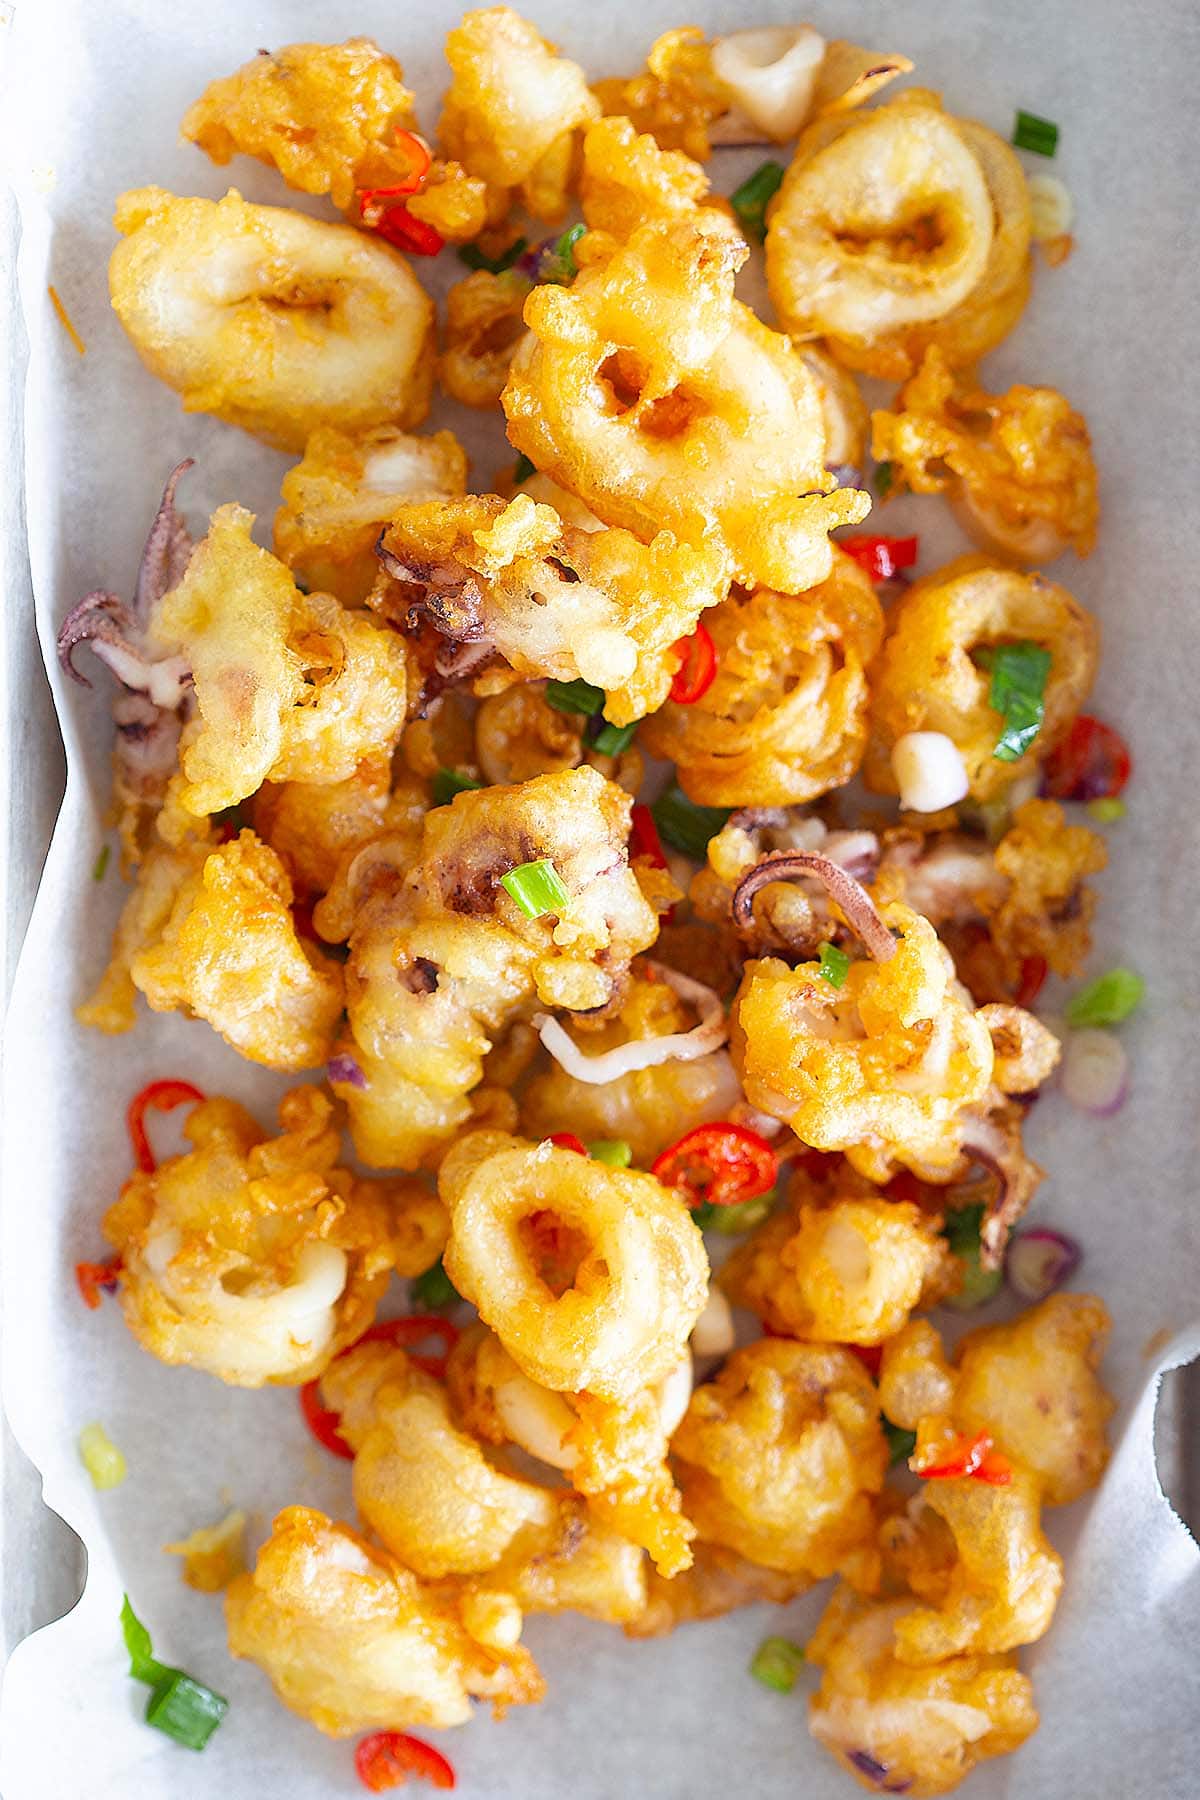 Salt and pepper squid on a plate.